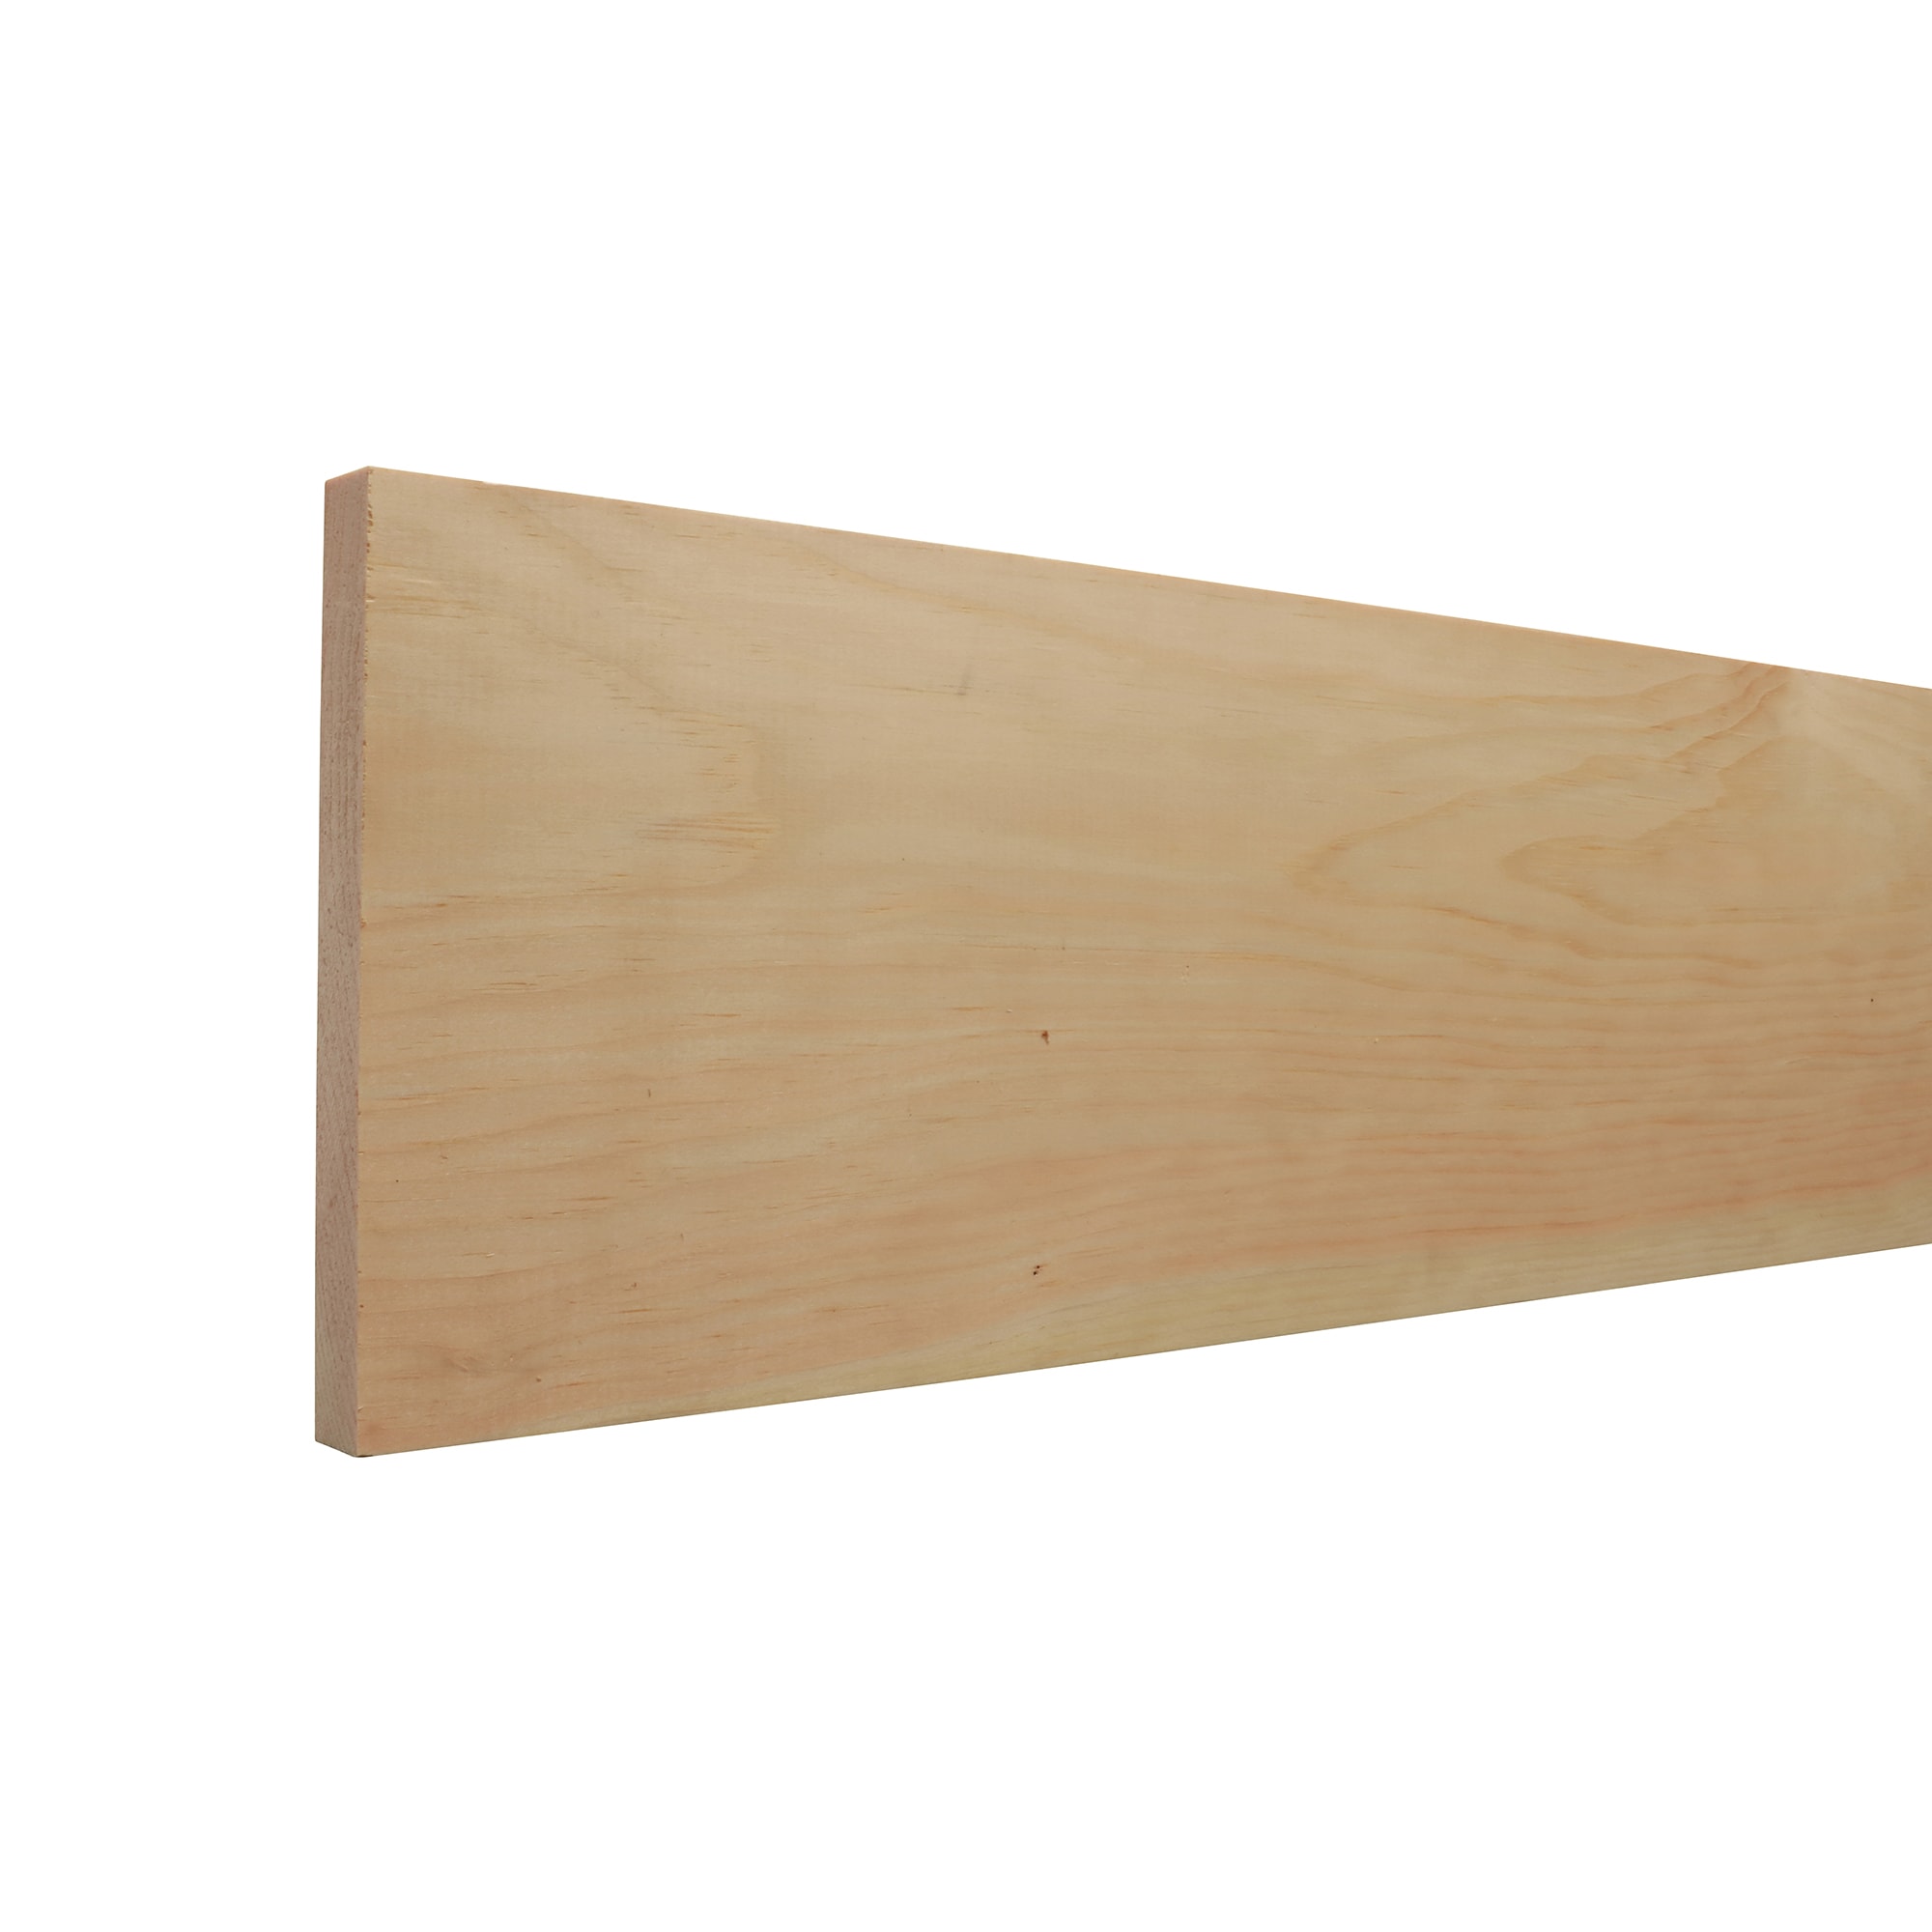 RELIABILT 1/2-in x 6-in x 4-ft Unfinished Oak Board in the Appearance  Boards department at